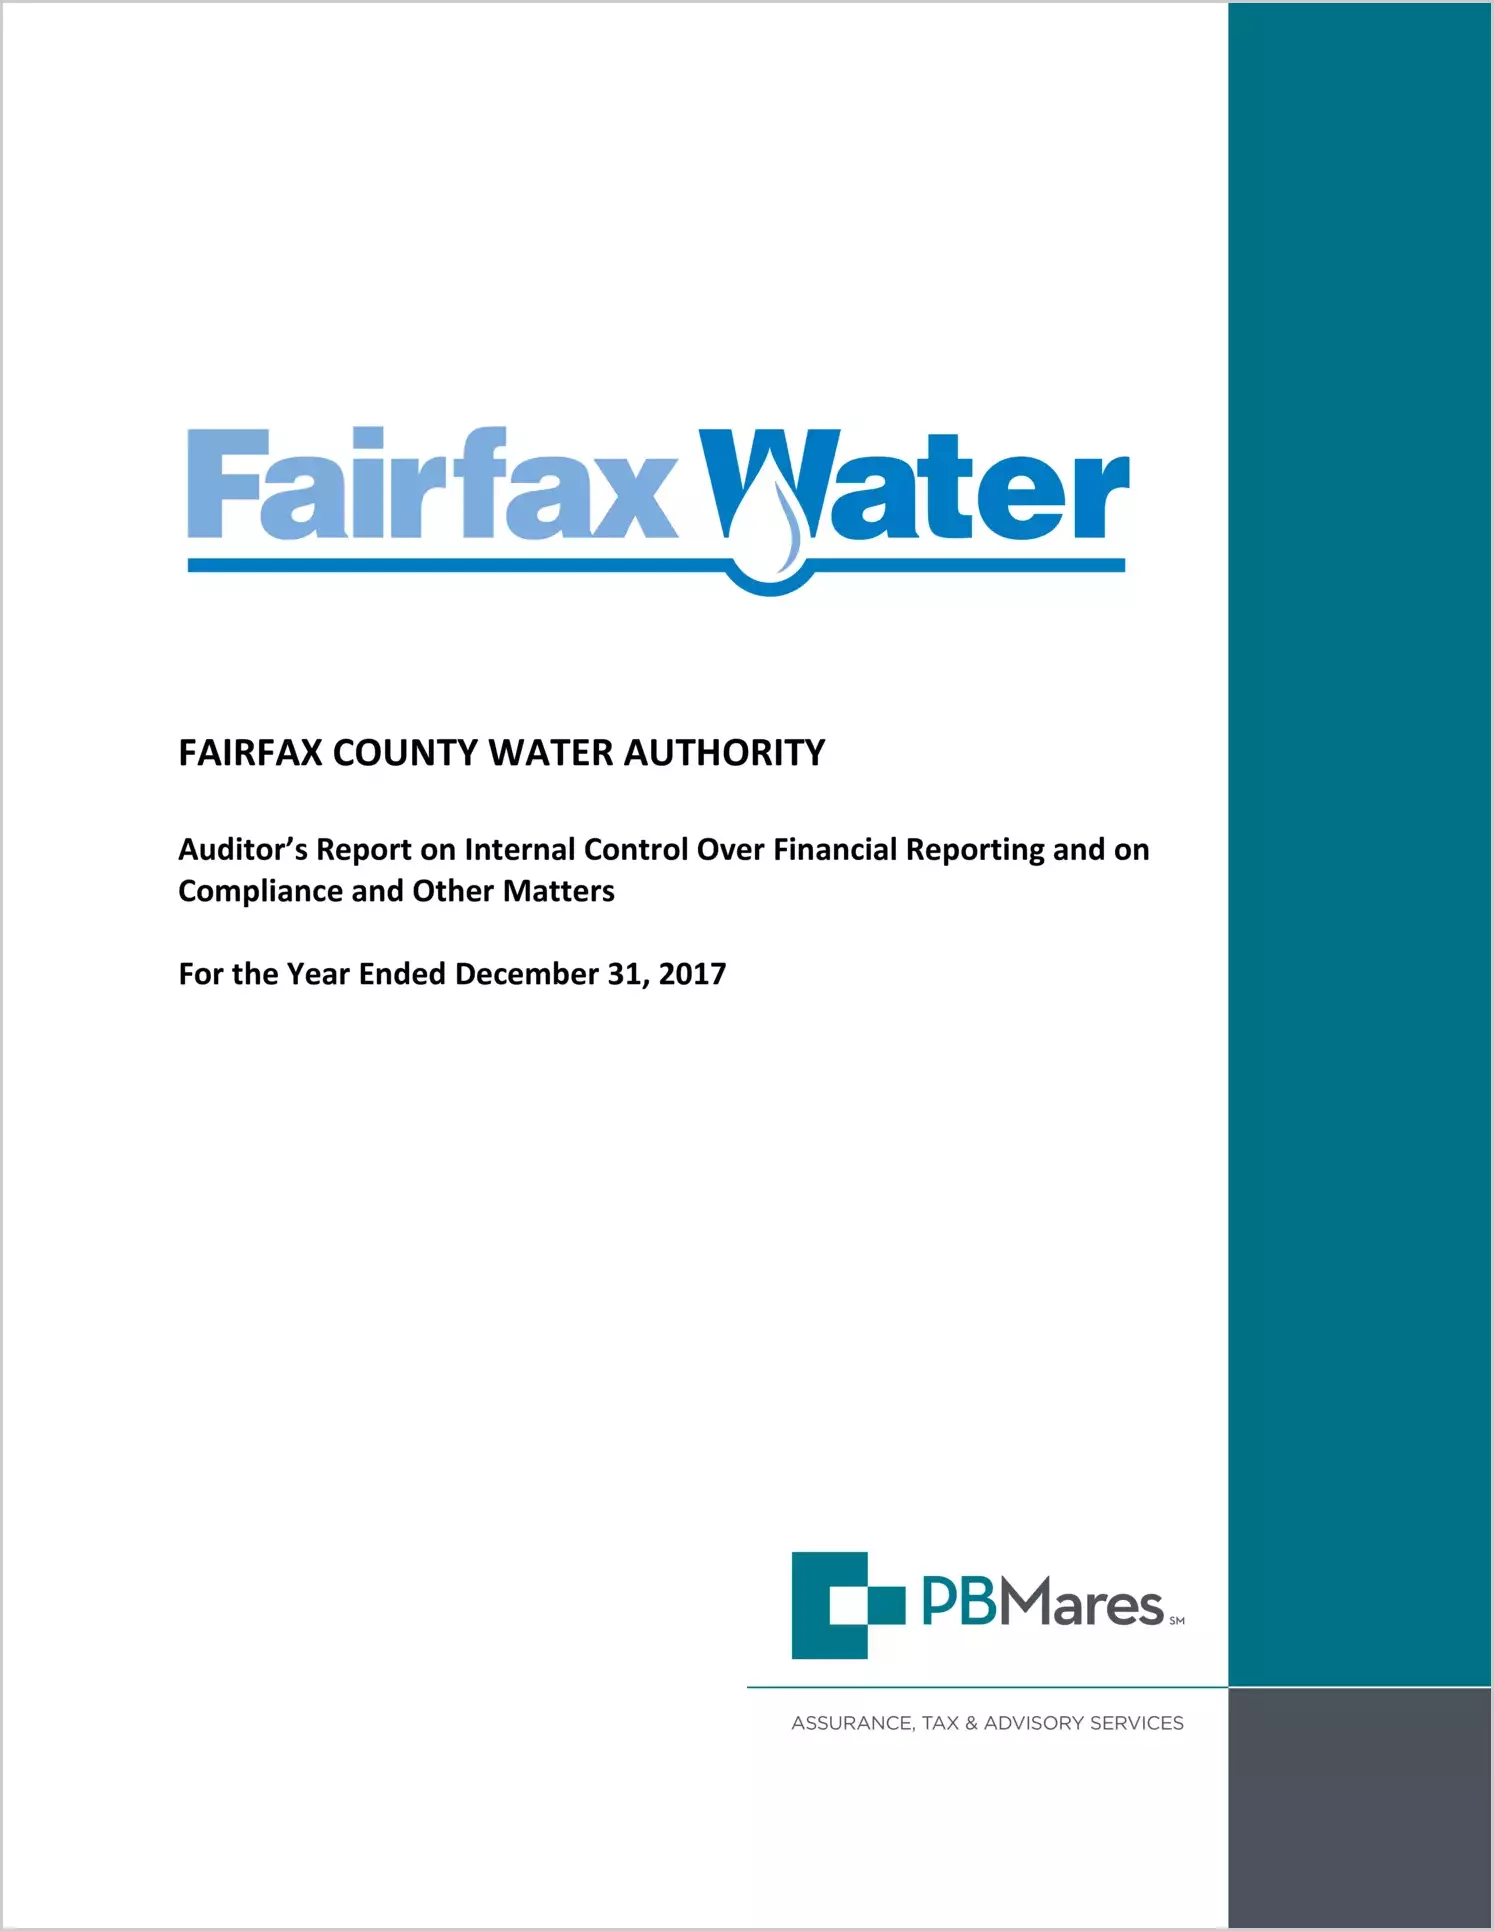 2017 ABC/Other Internal Control and Compliance Report for Fairfax County Water Authority